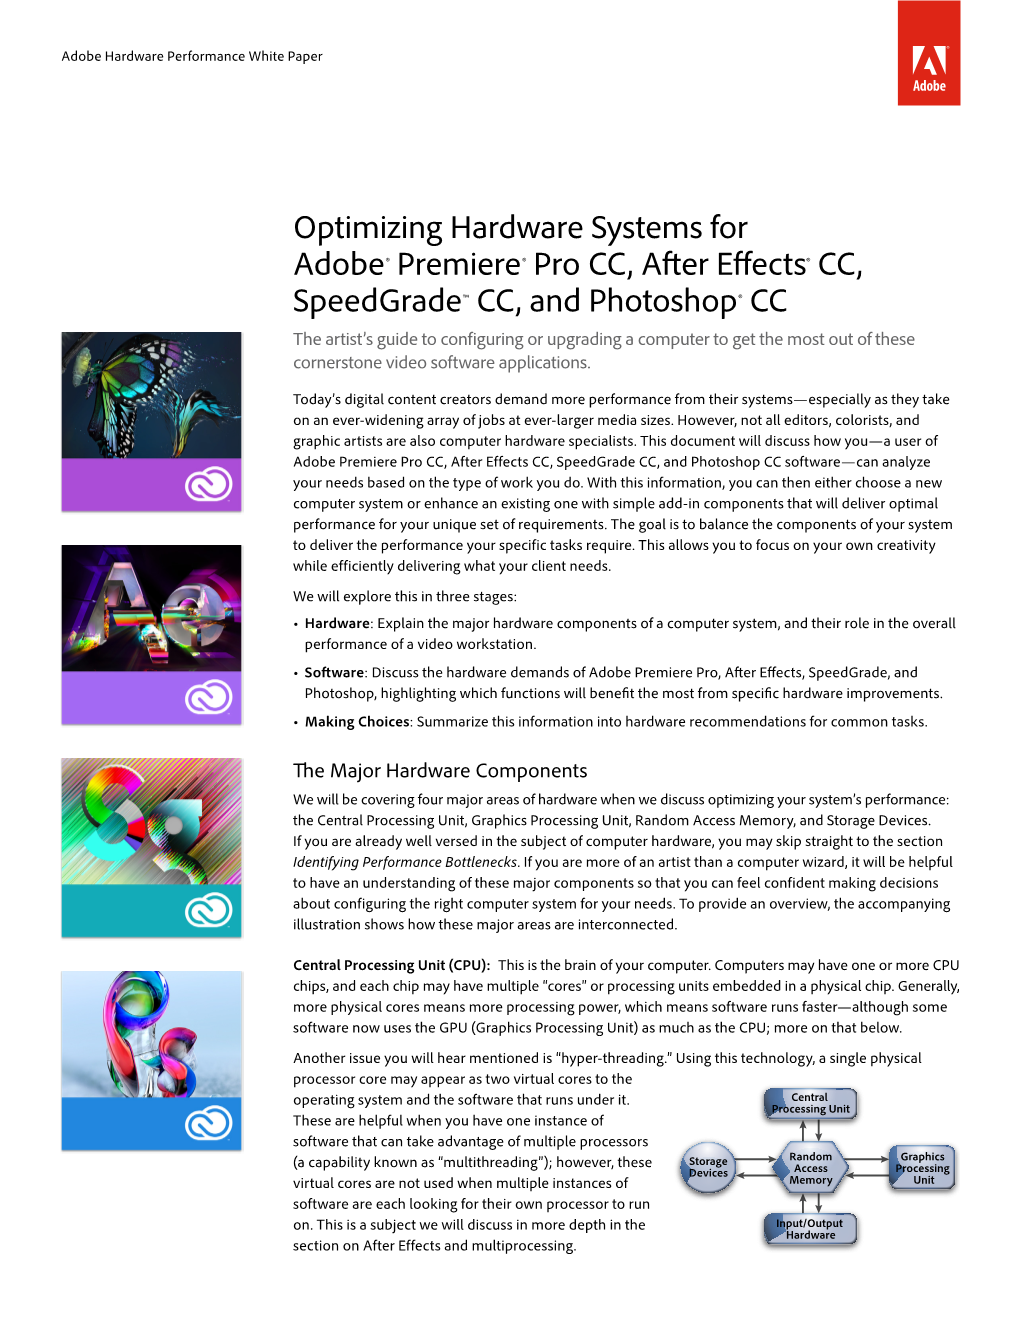 Optimizing Hardware Systems for Adobe Video Applications